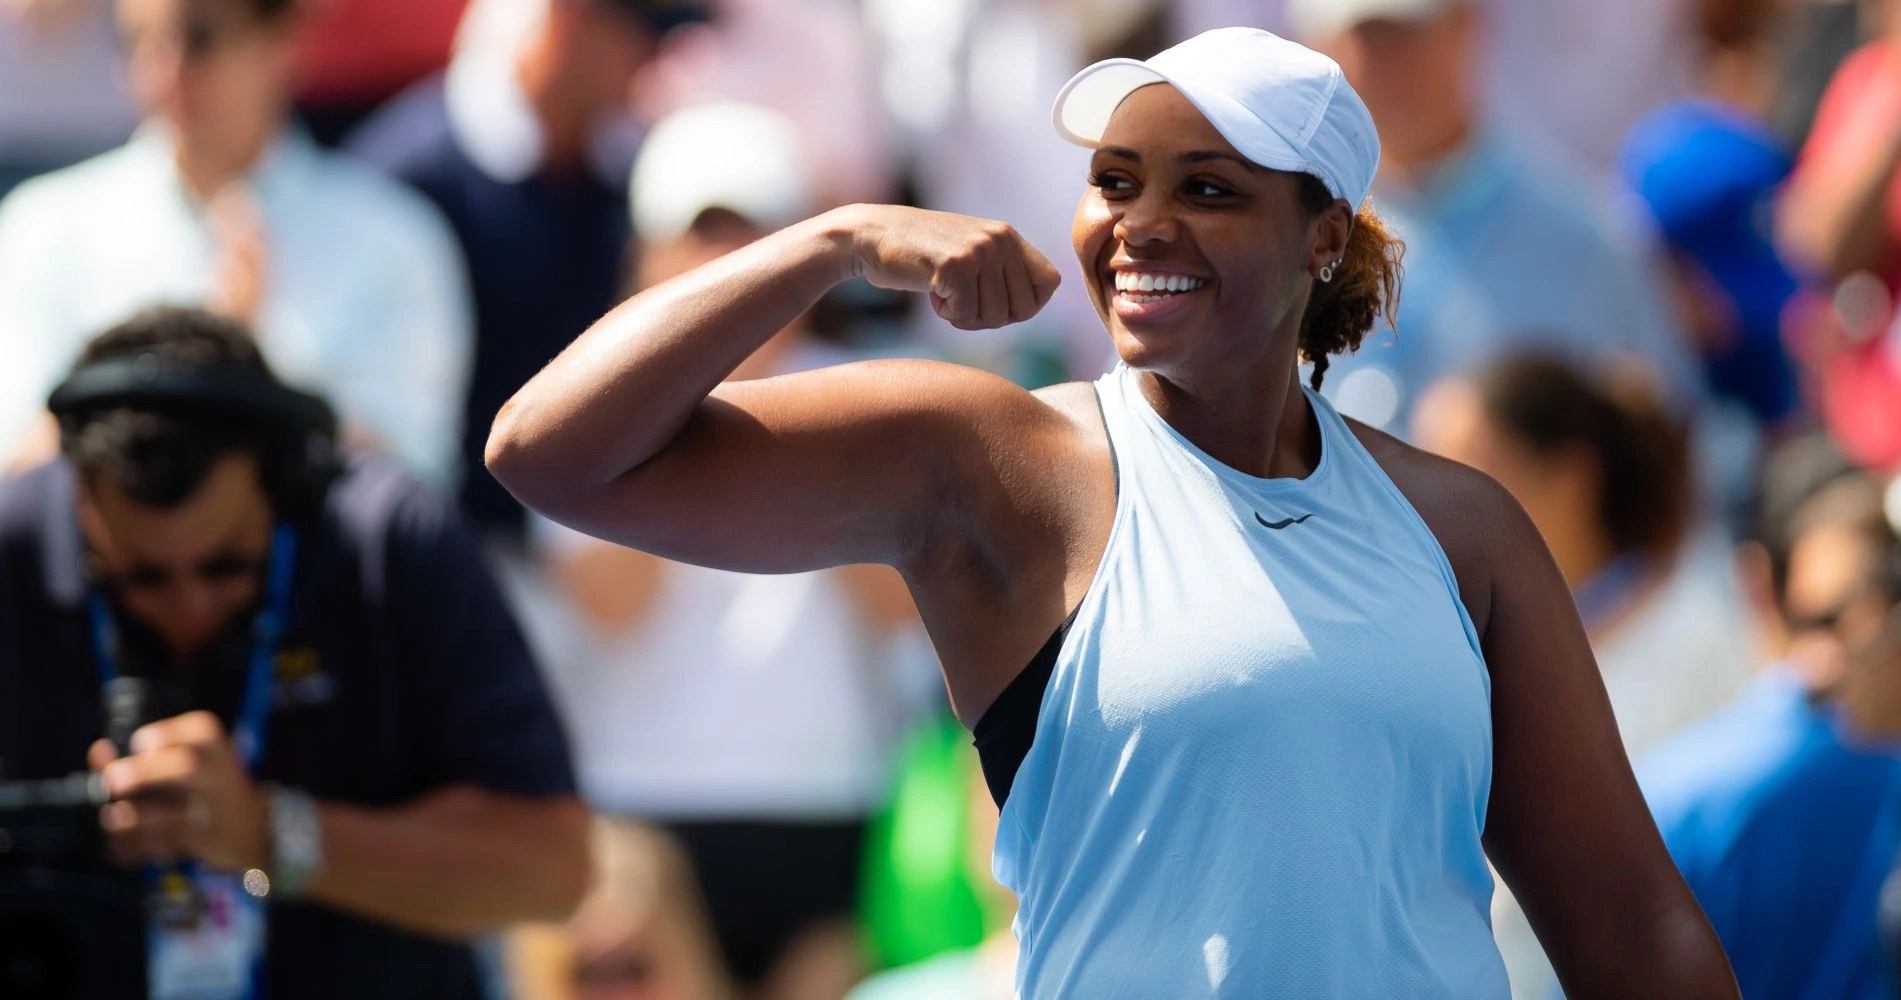 Tennis Taylor Townsend wins comeback match after giving birth last year